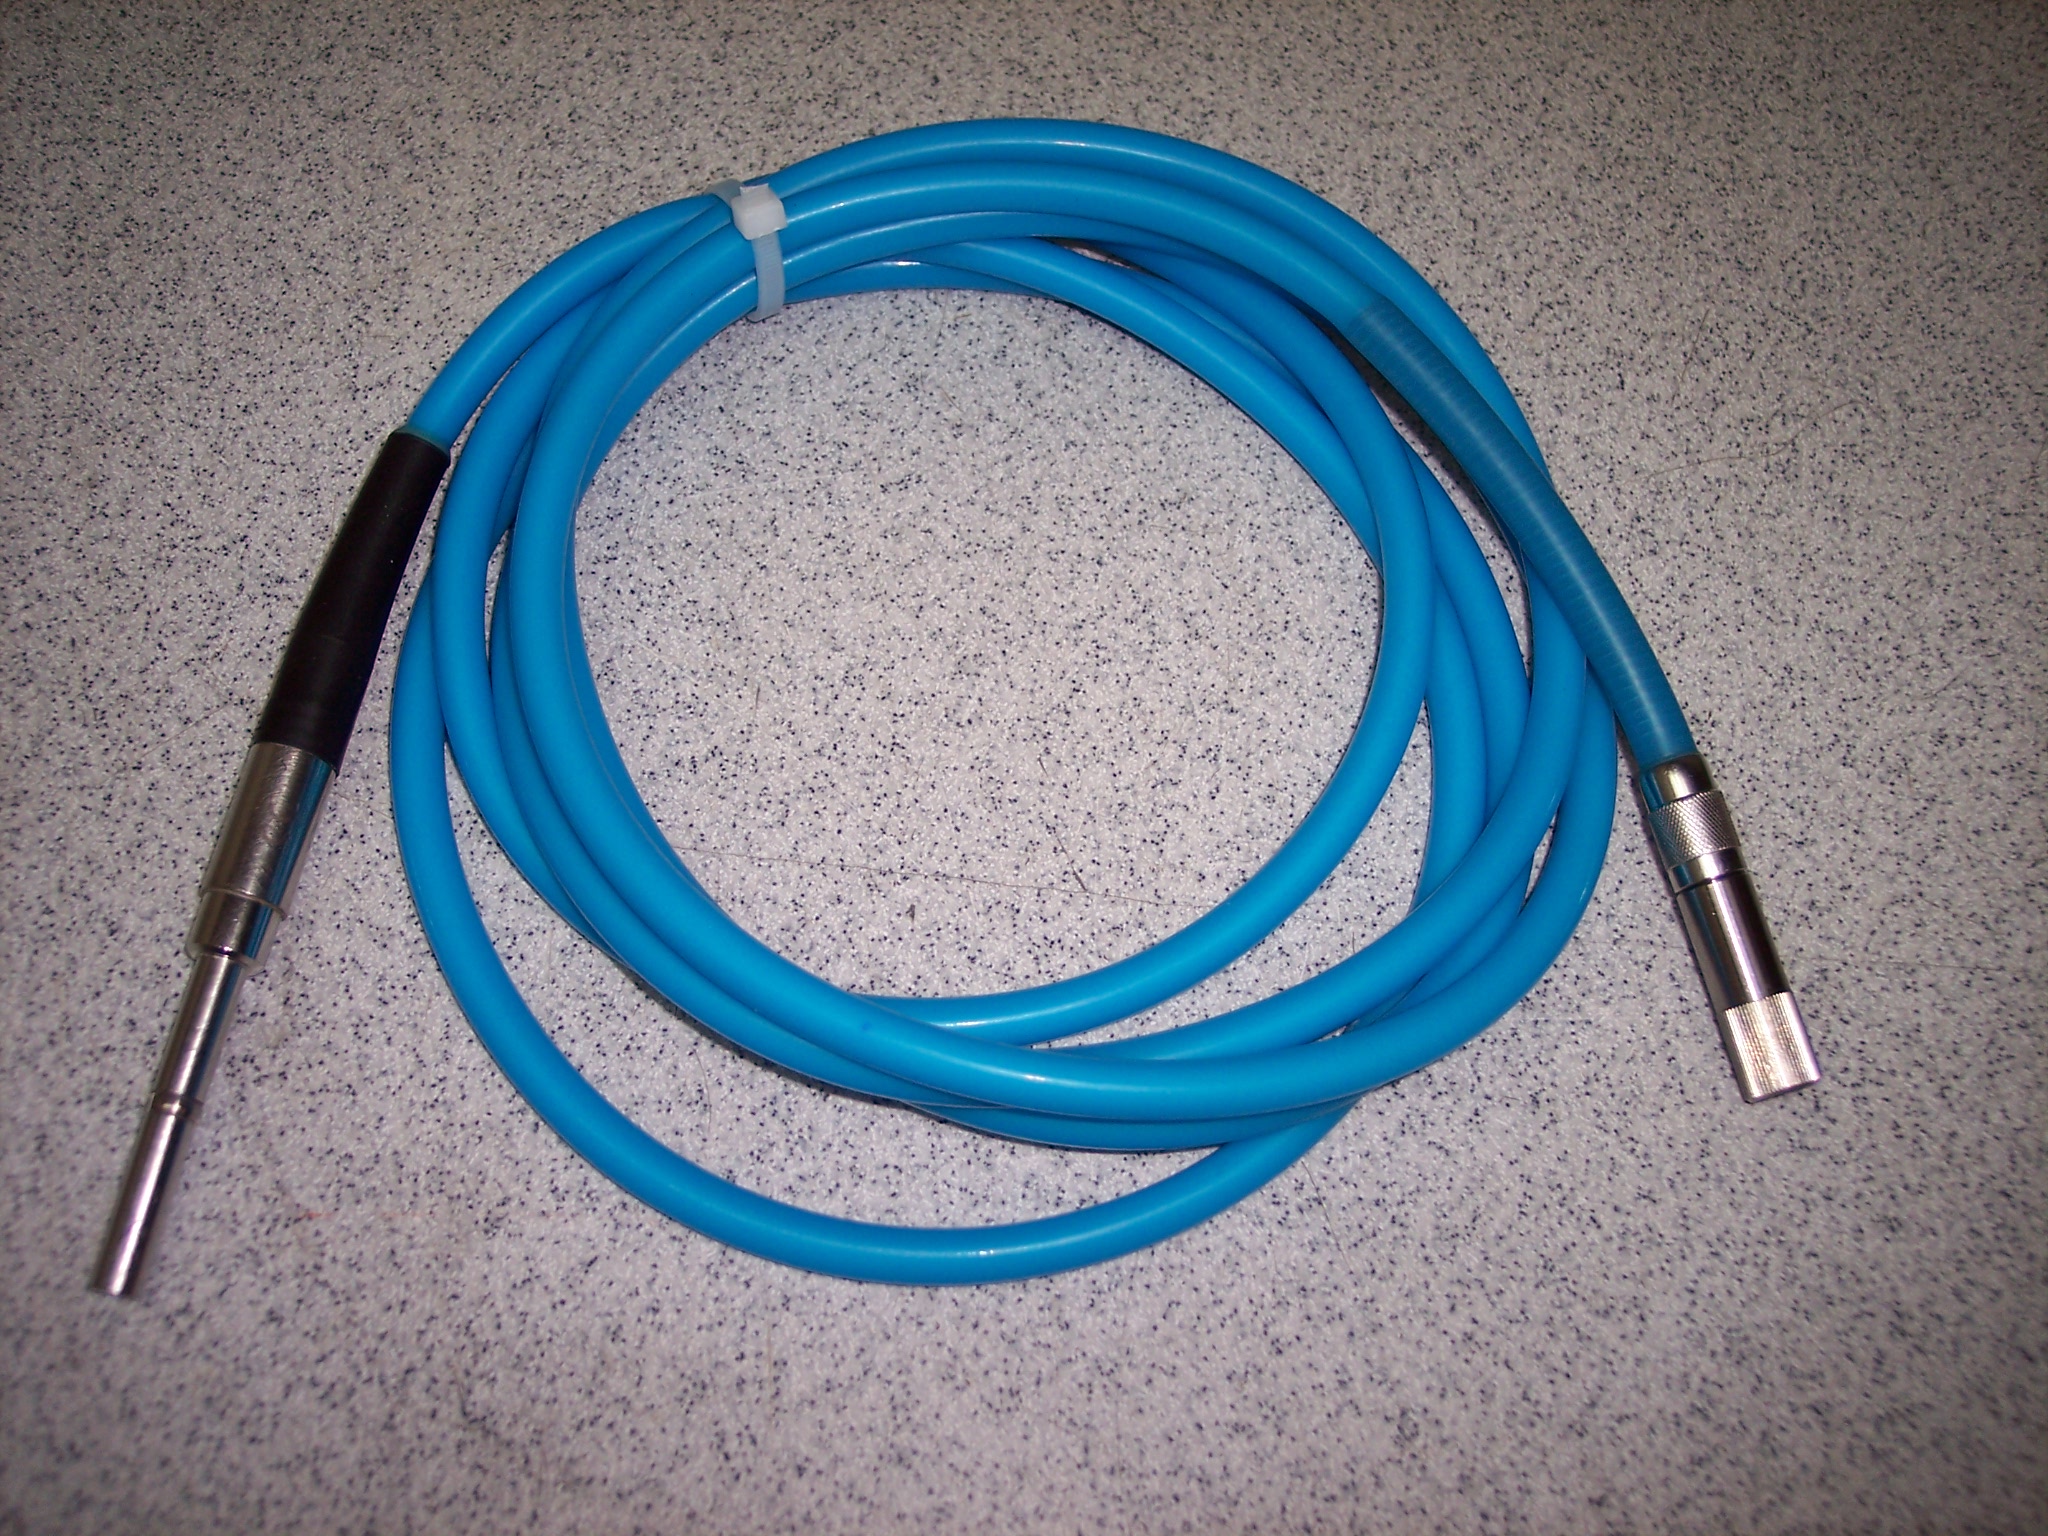 Conmed Linvatec LG1050 Light Cable 